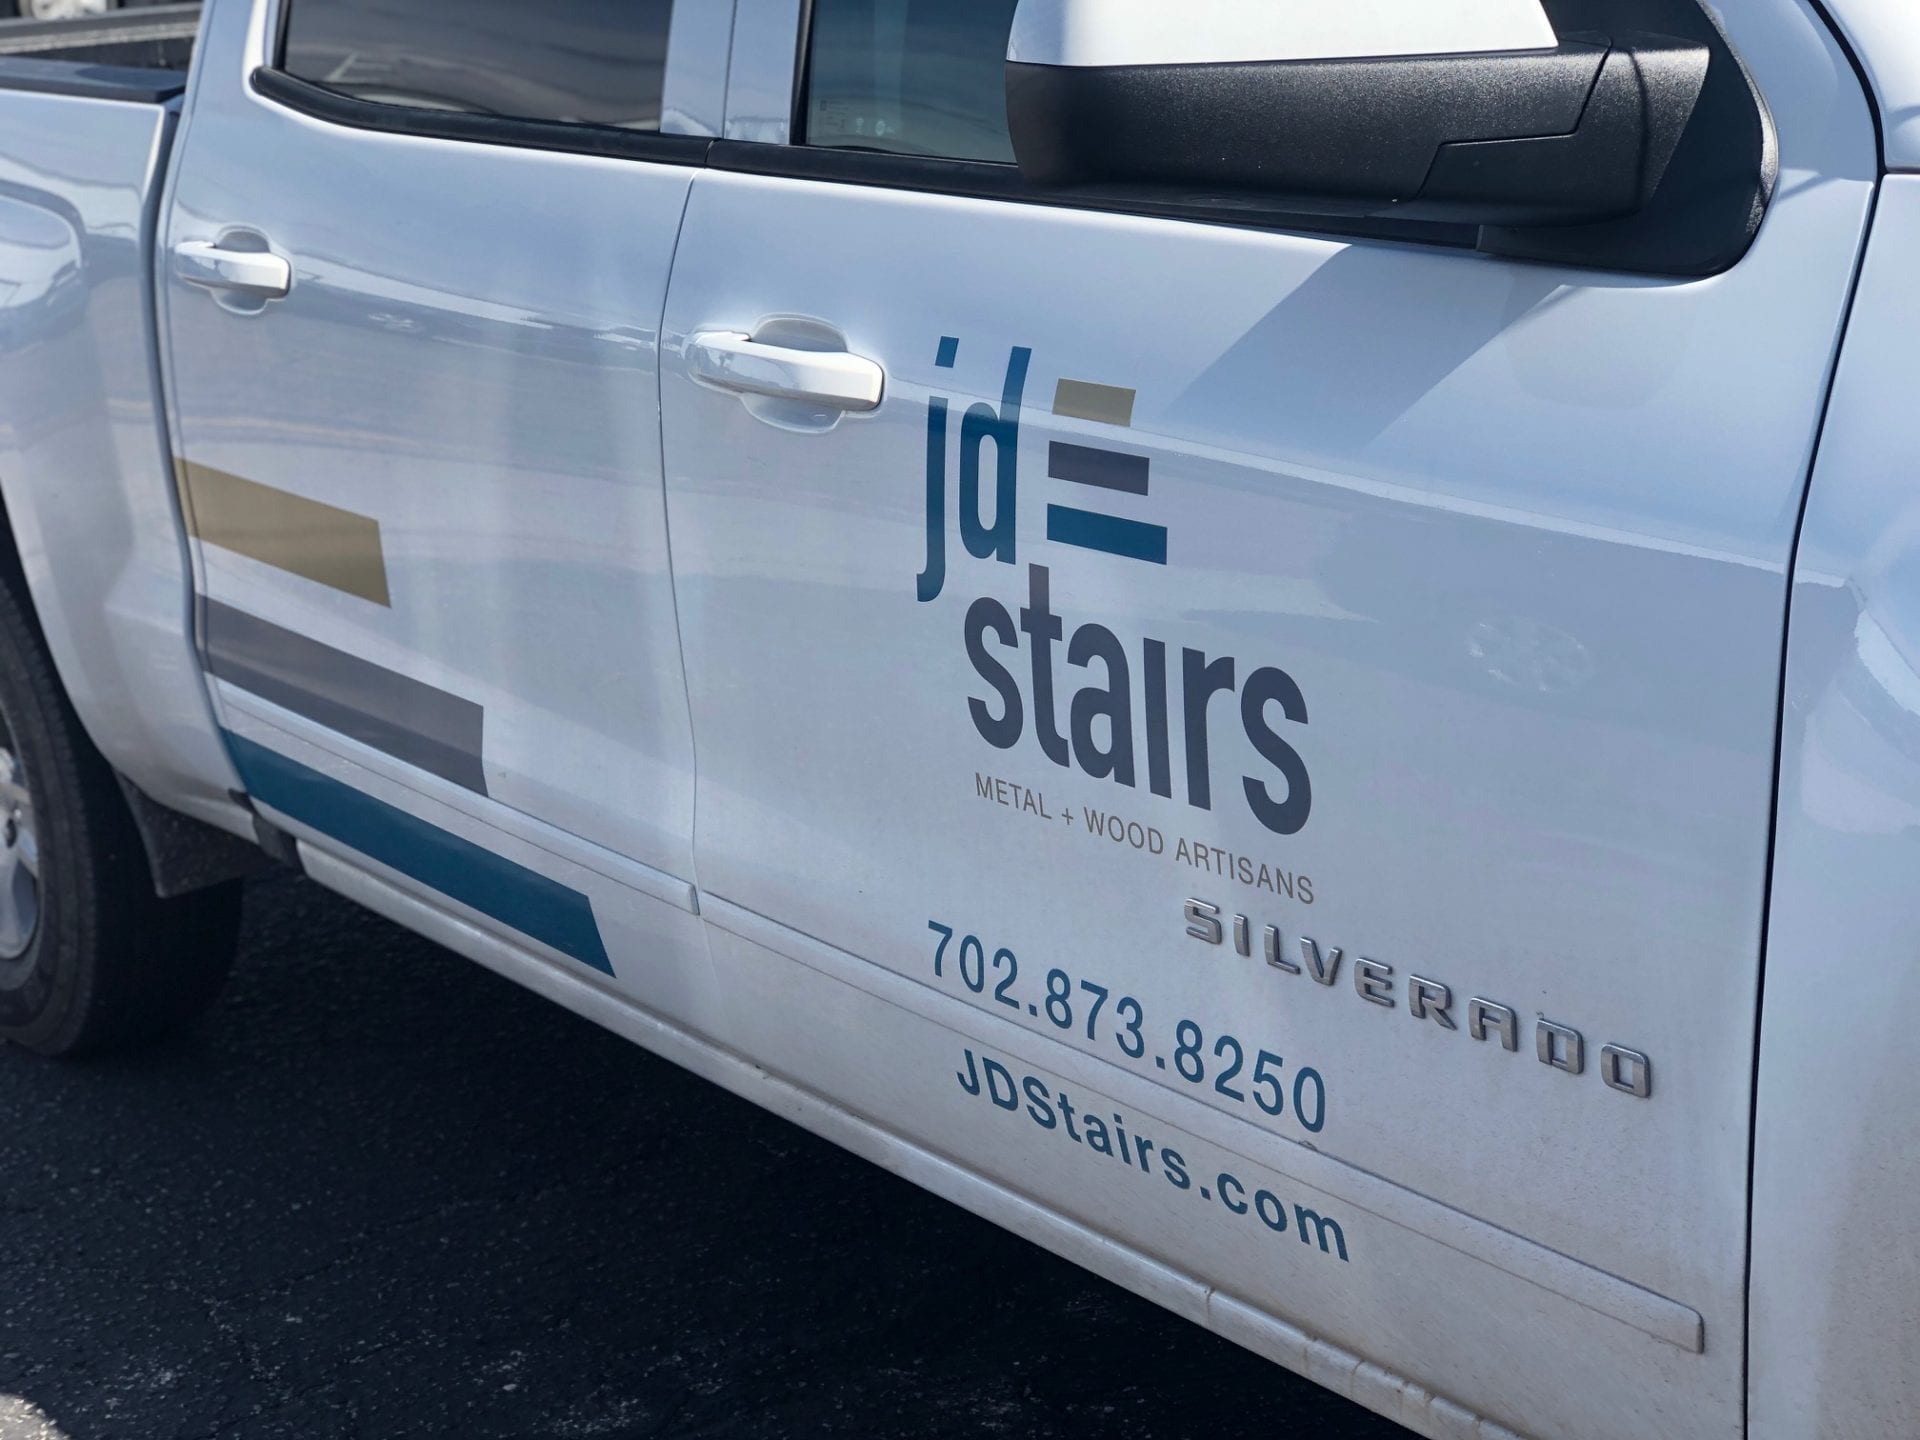 JD Stairs logo on the side of a work truck